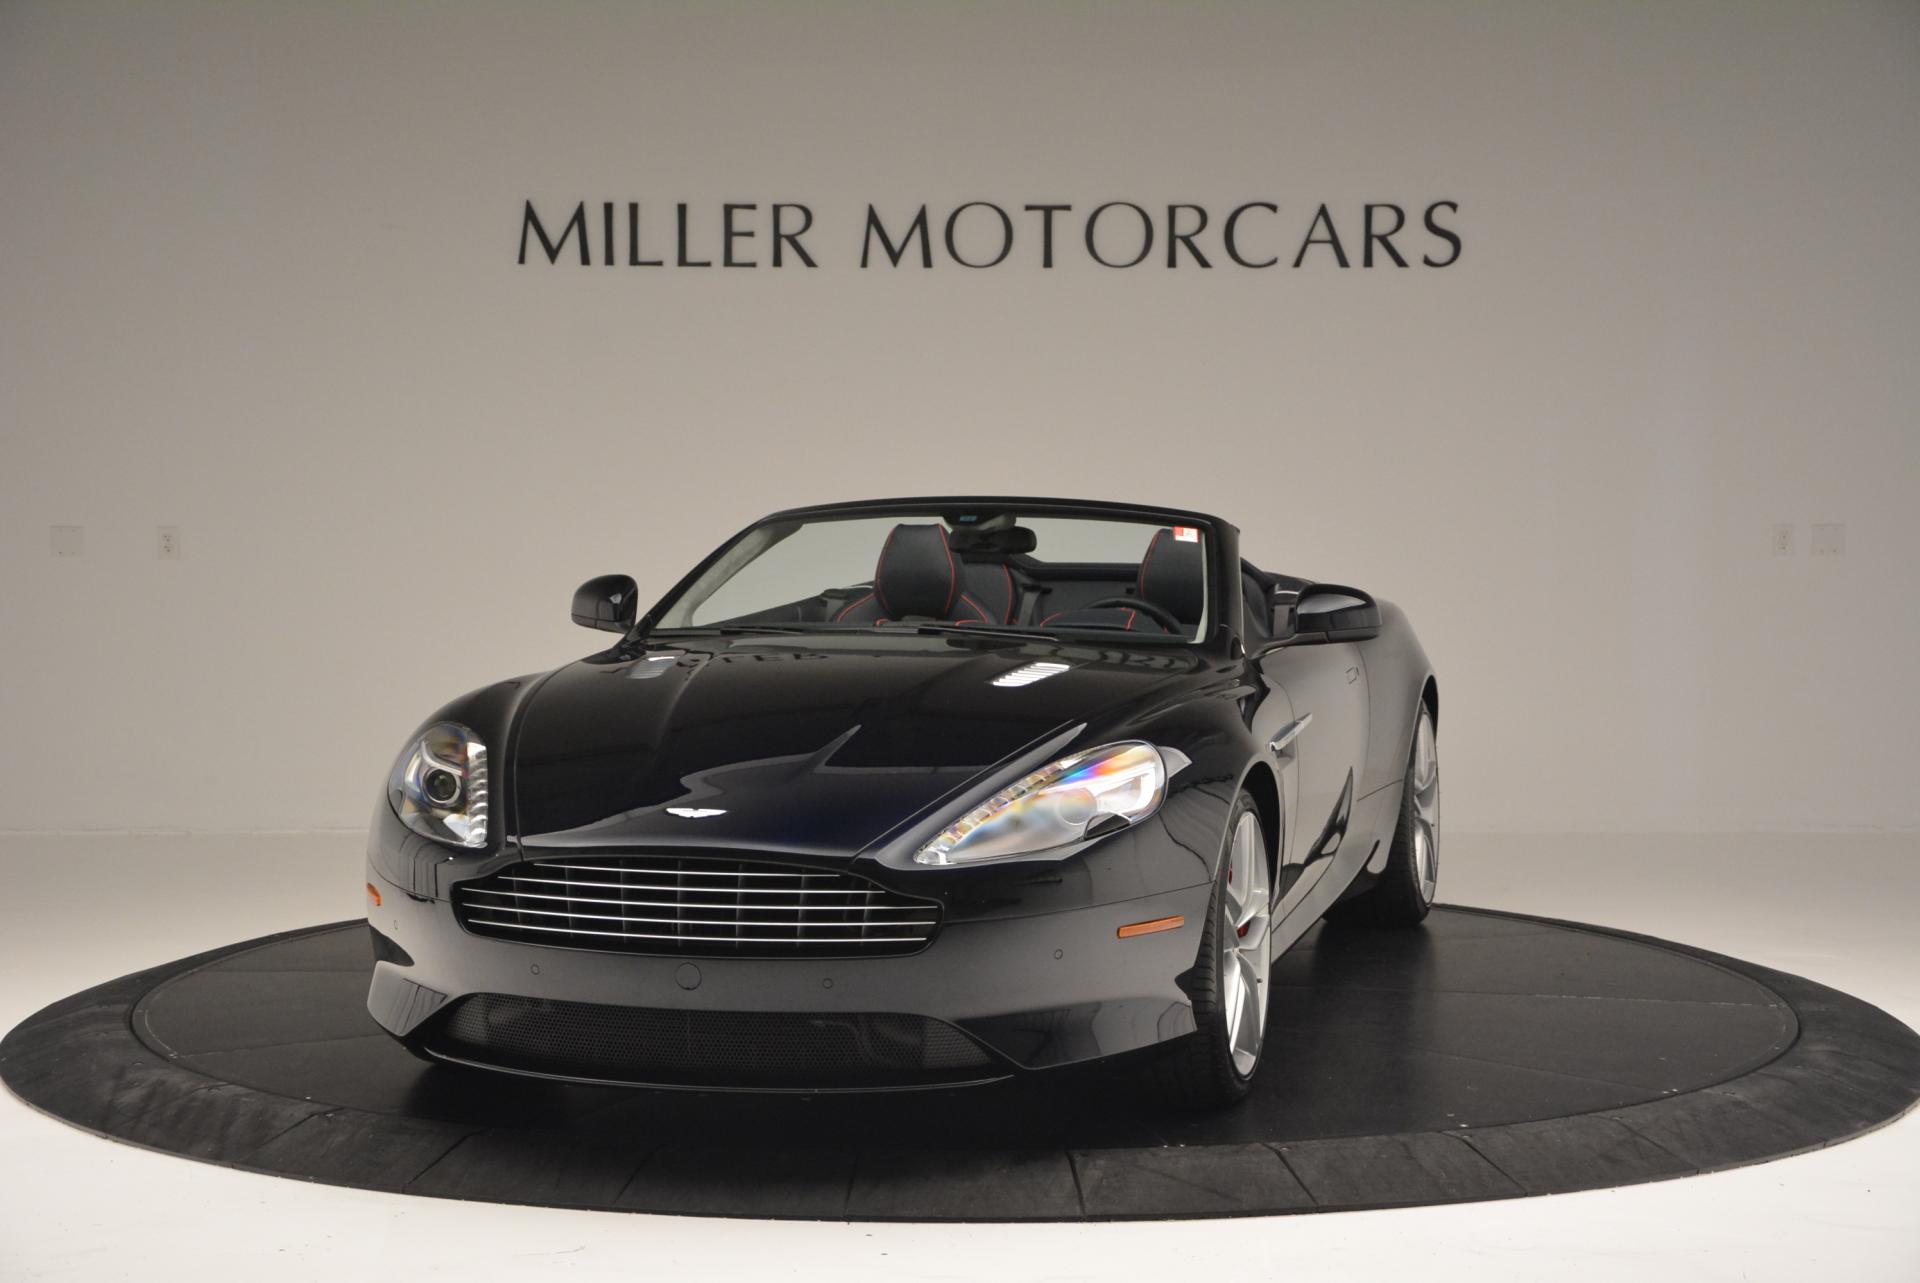 New 2016 Aston Martin DB9 GT Volante for sale Sold at Pagani of Greenwich in Greenwich CT 06830 1